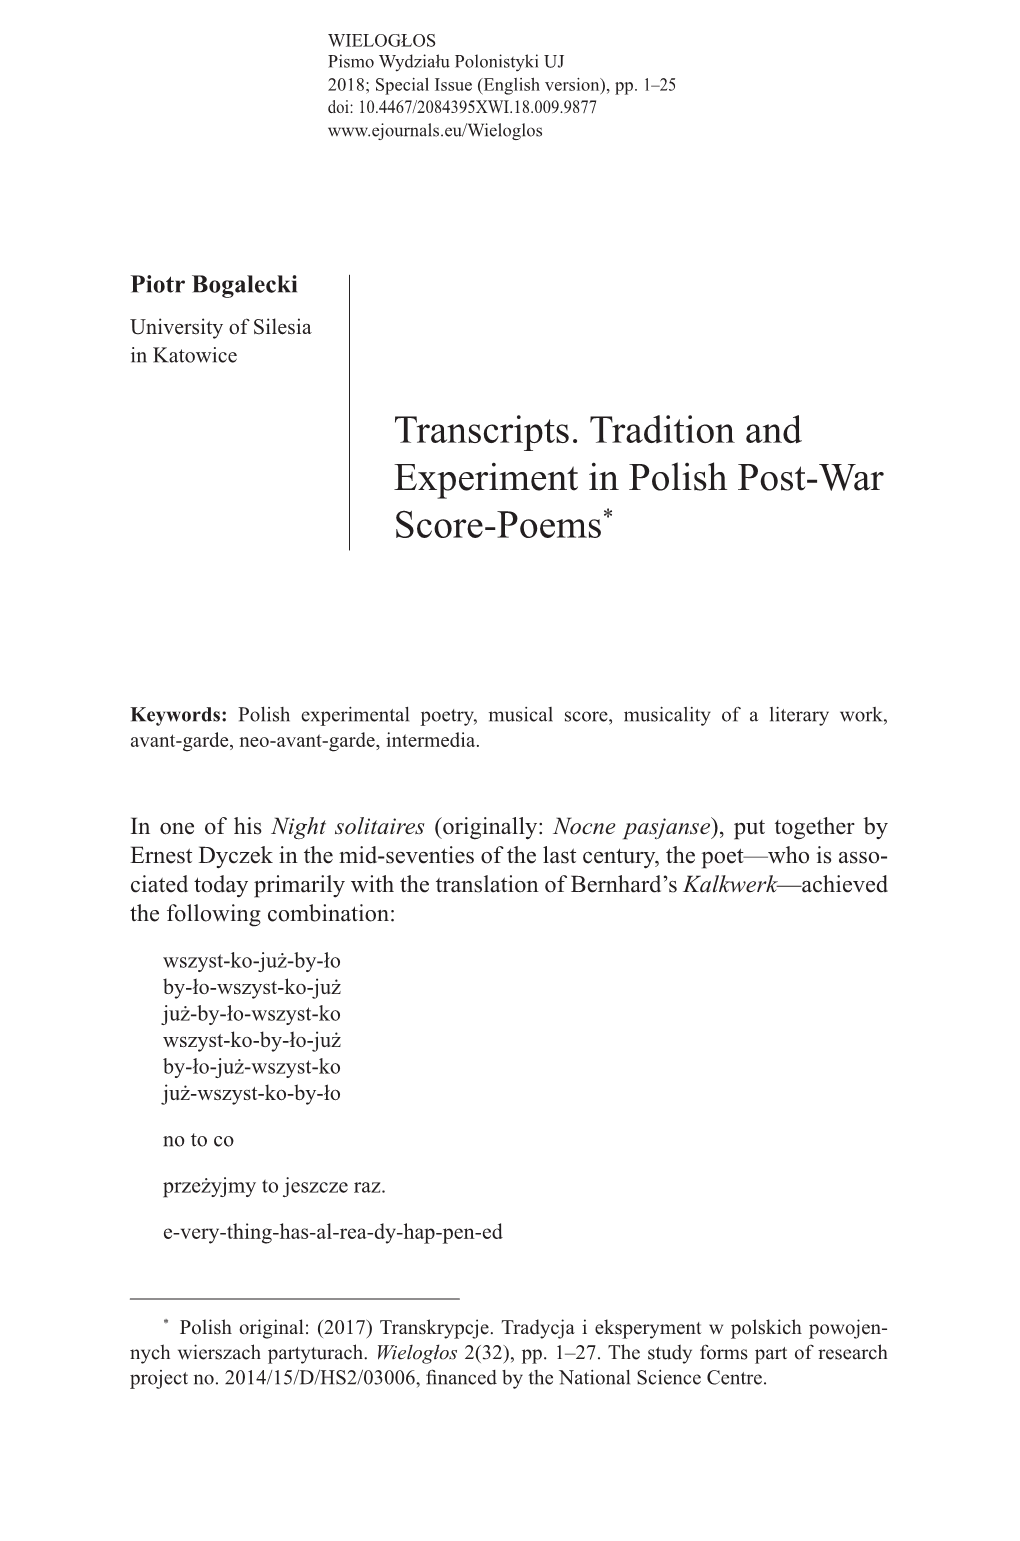 Transcripts. Tradition and Experiment in Polish Post-War Score-Poems*